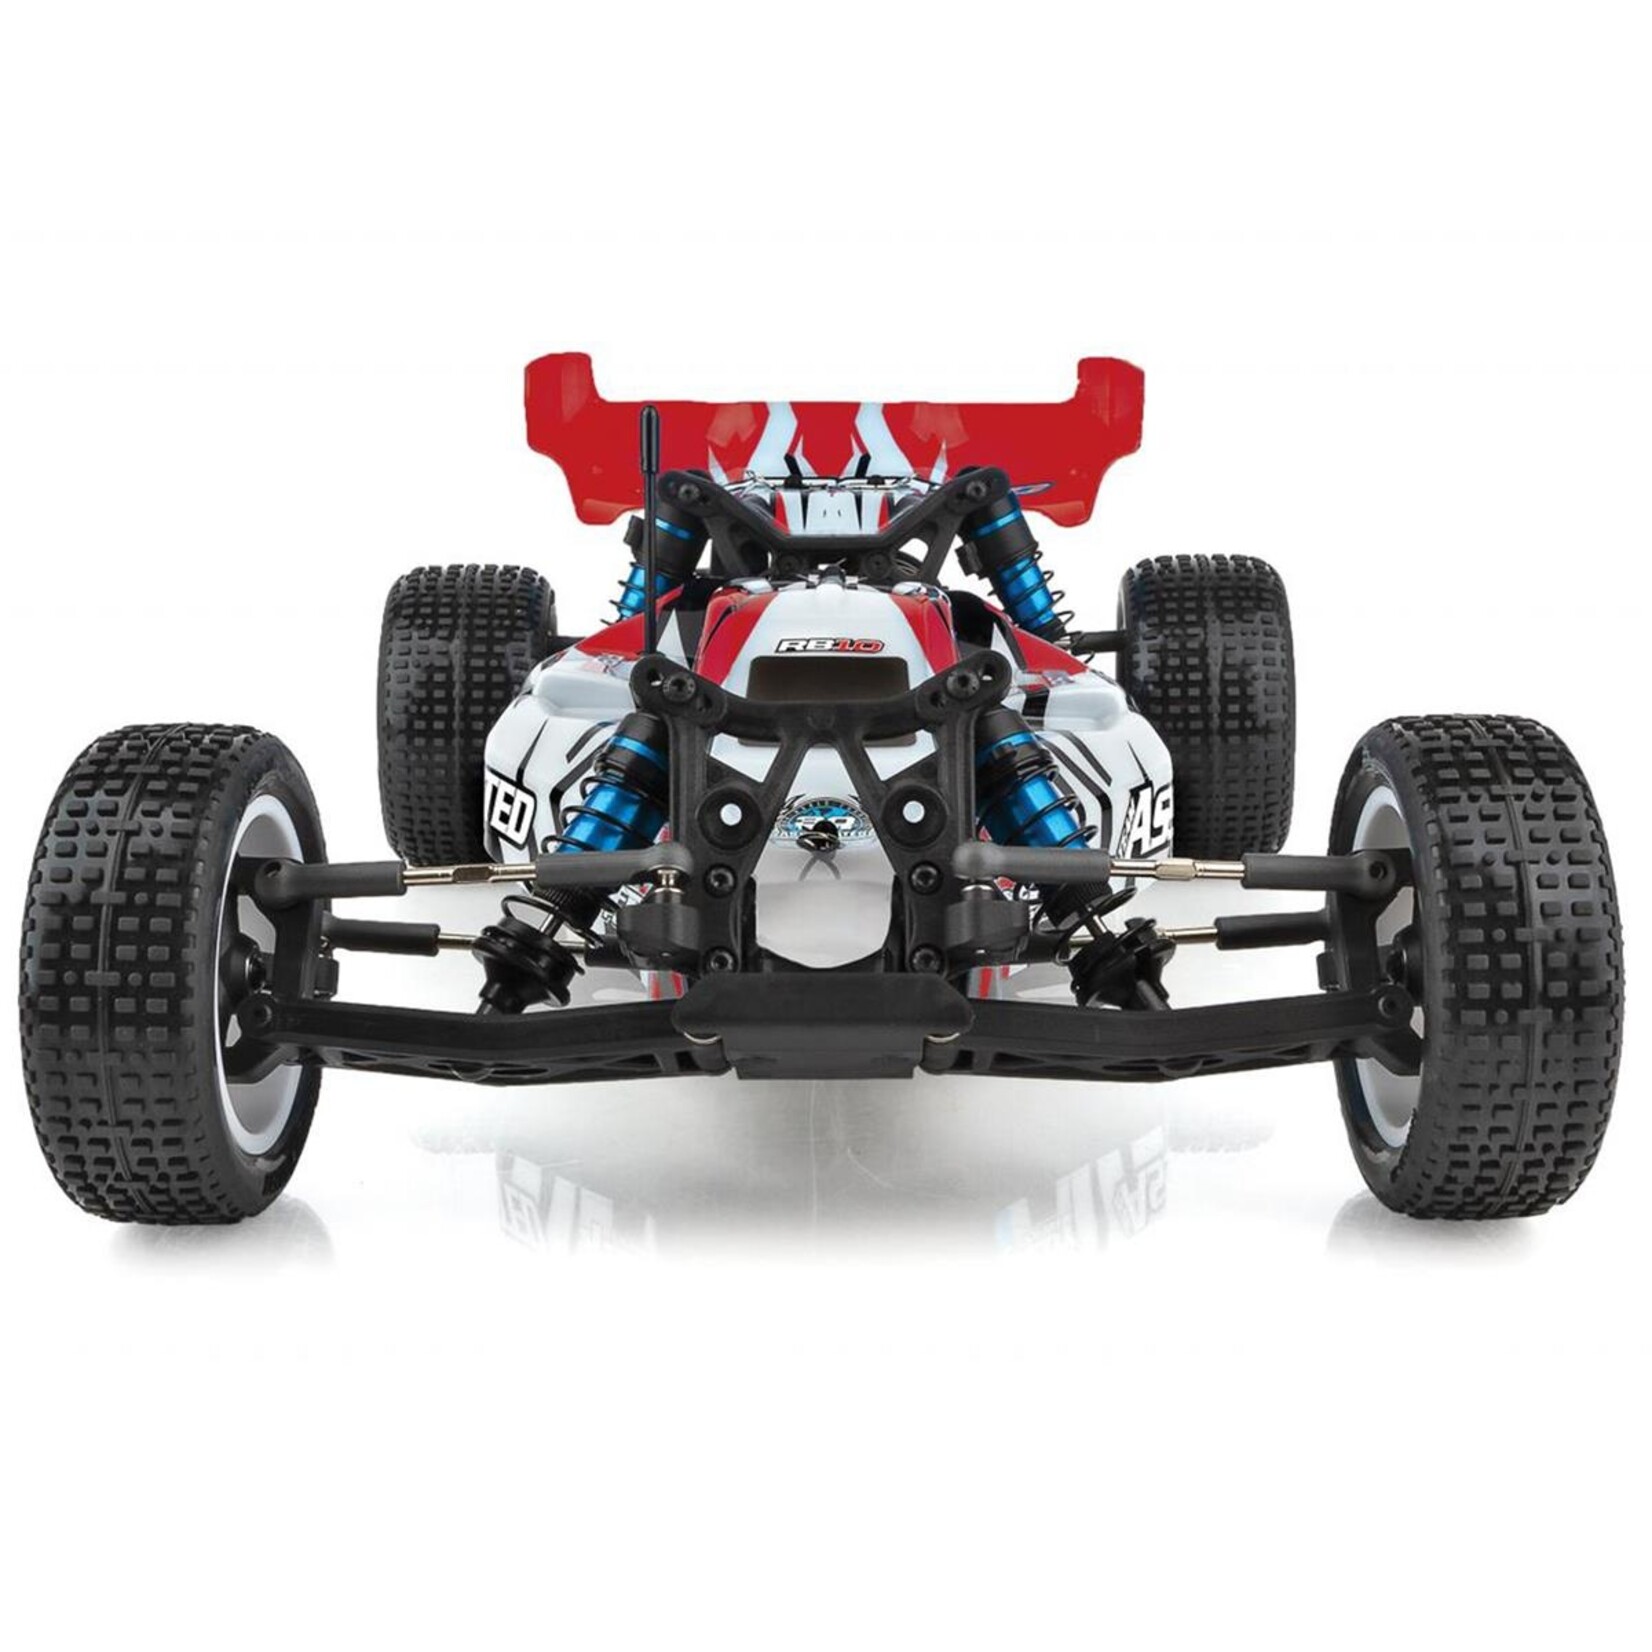 Team Associated Team Associated RB10 RTR 1/10 Electric 2WD Brushless Buggy Combo (Red) w/2.4GHz Radio, DVC & Battery & Charger #90032C